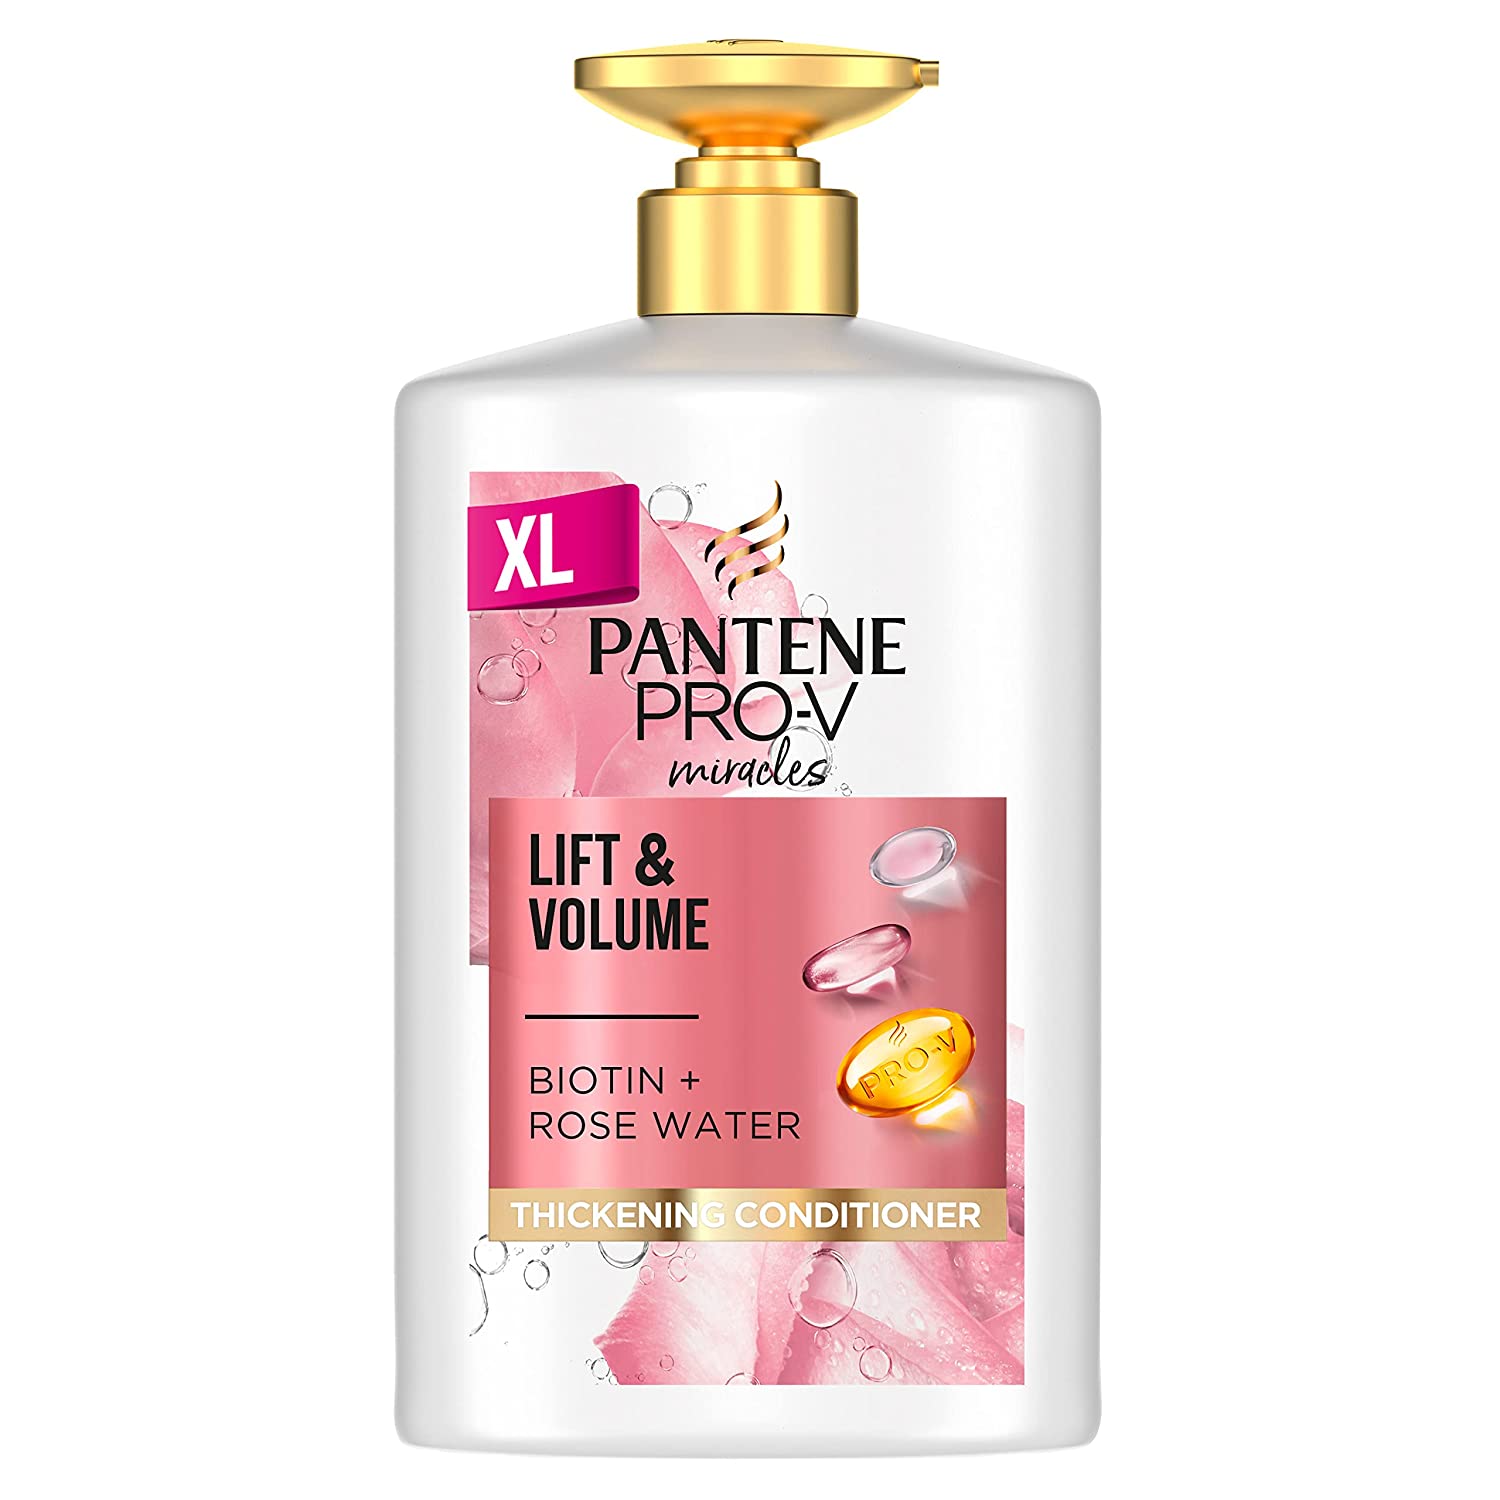 Pantene Pro-V Lift & Volume Conditioner with Biotin & Rose Water | For Instant Fullness and Visibly Thicker Hair | XL Bottle with Pump Dispenser 1 L, ‎white